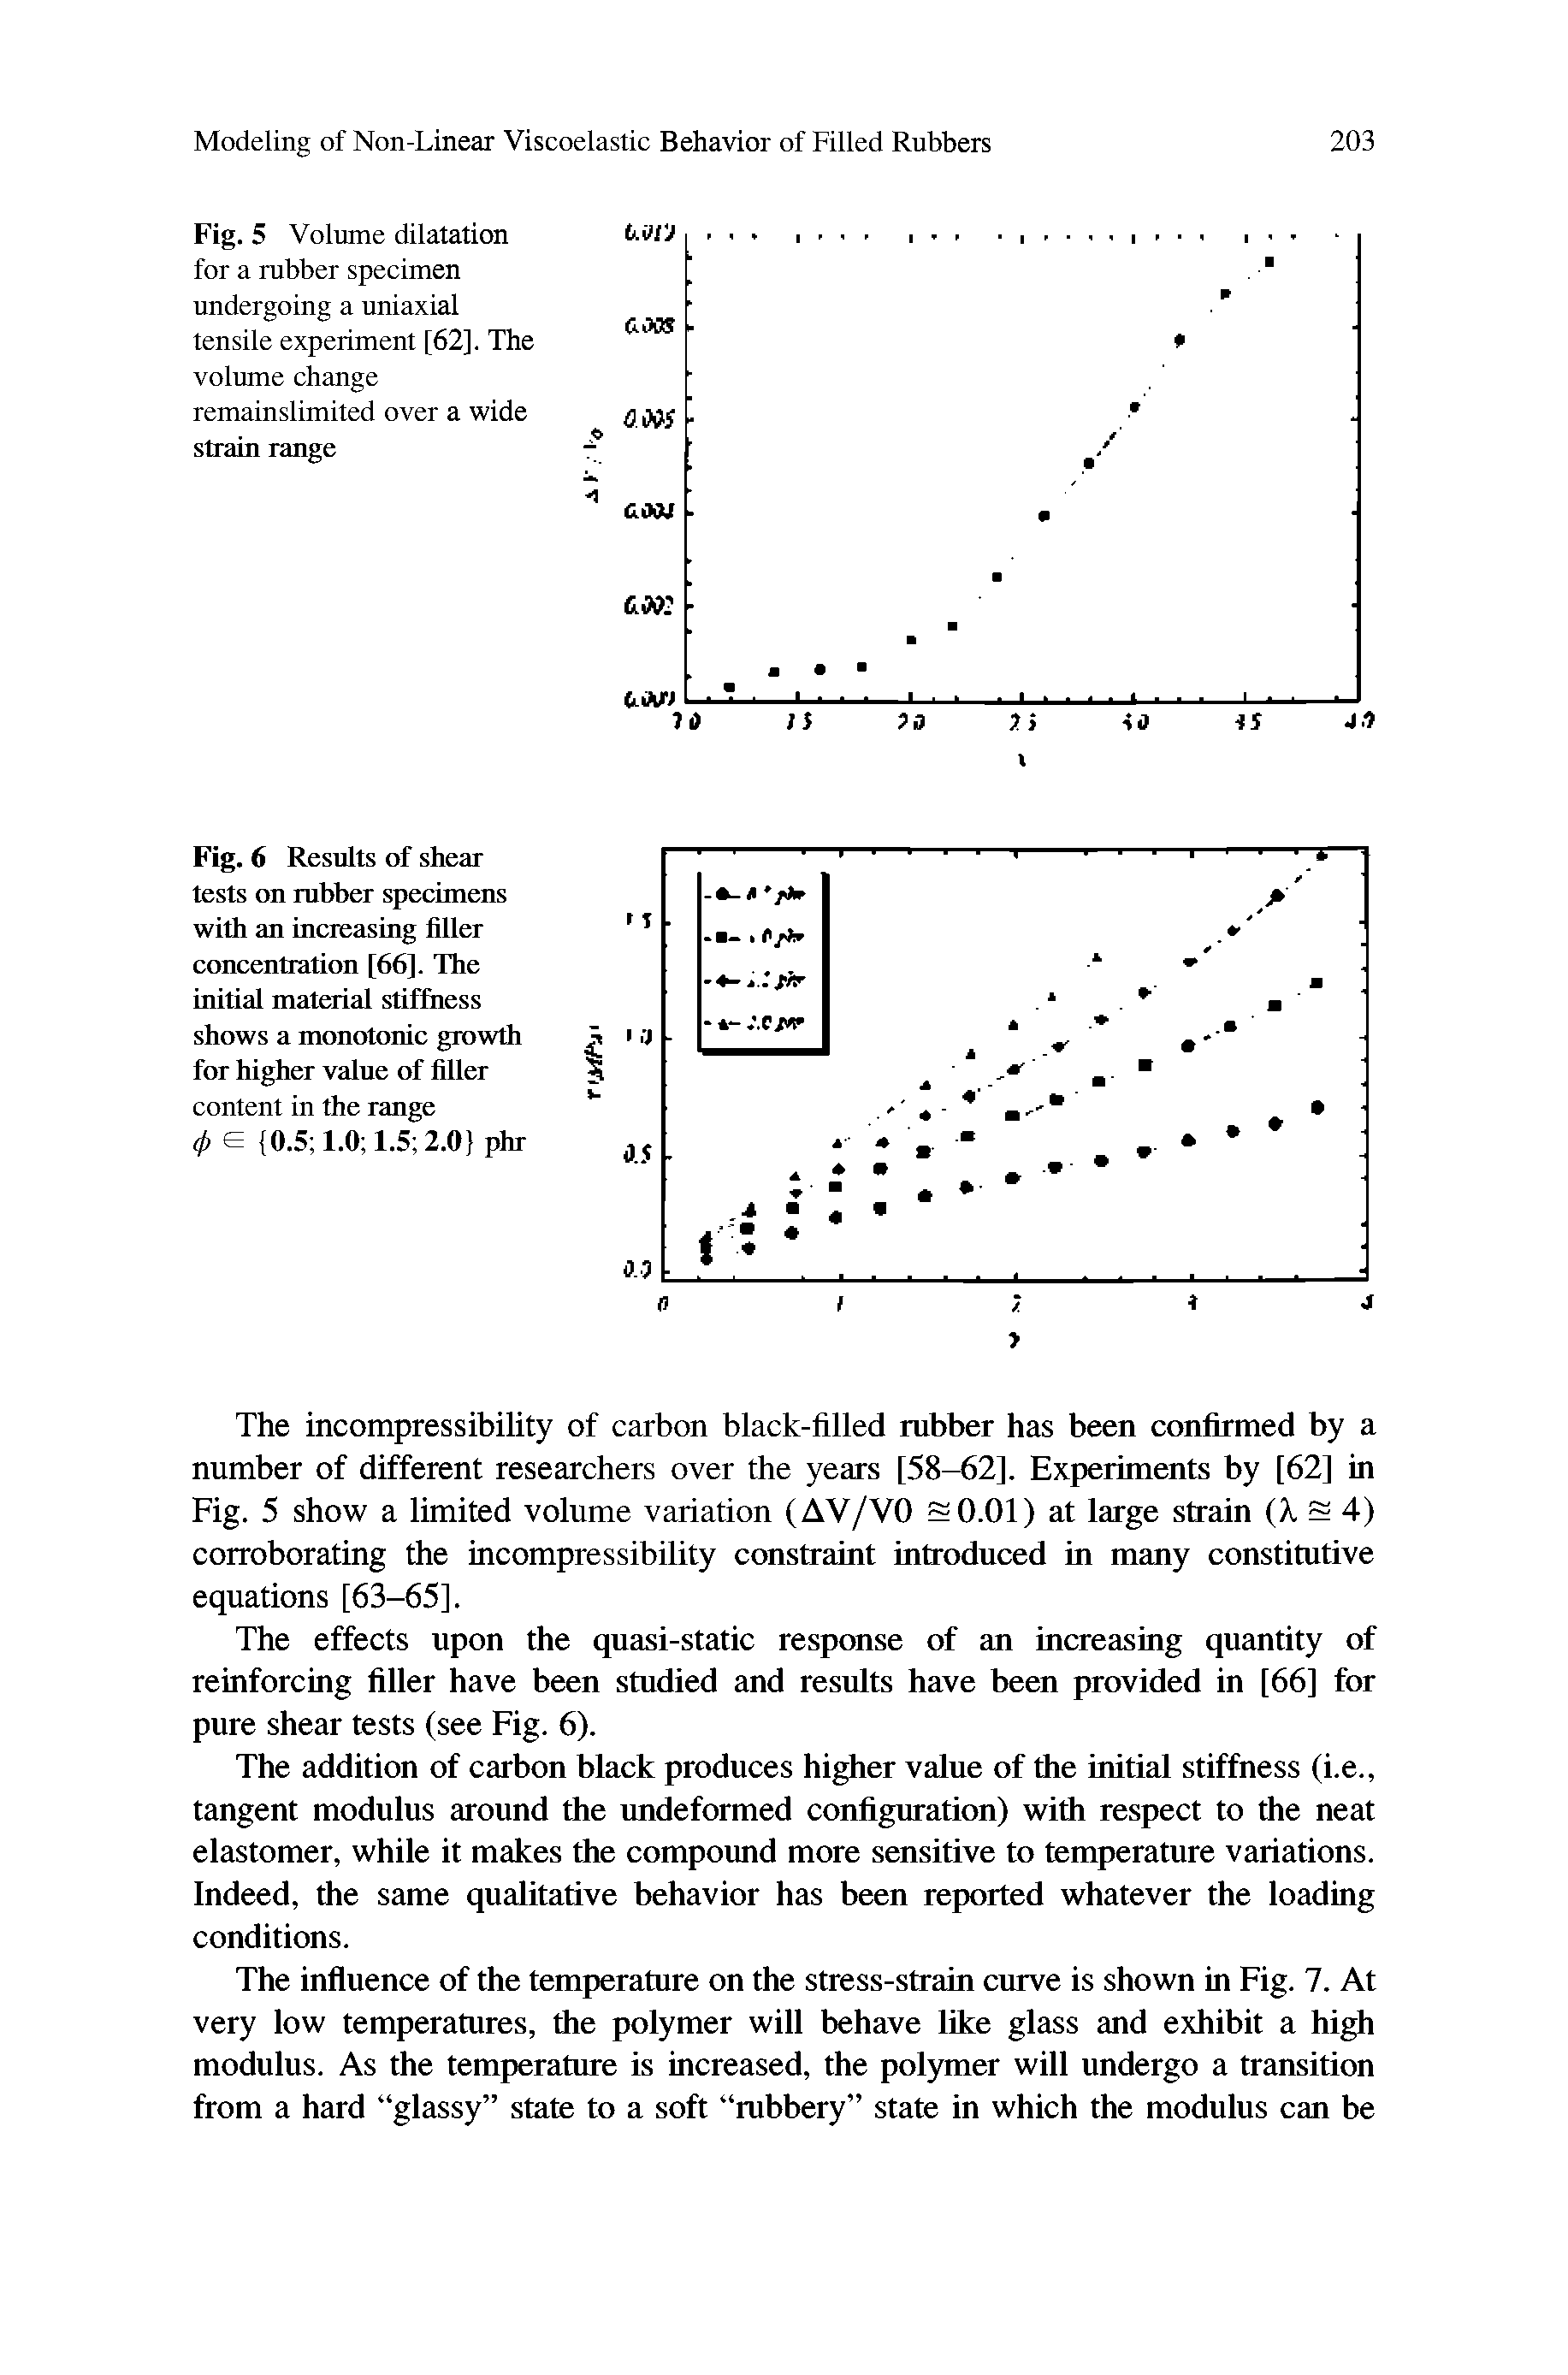 Fig. 5 Volume dilatation for a rubber specimen undergoing a uniaxial tensile experiment [62], The volume change remainslimited over a wide strain range...